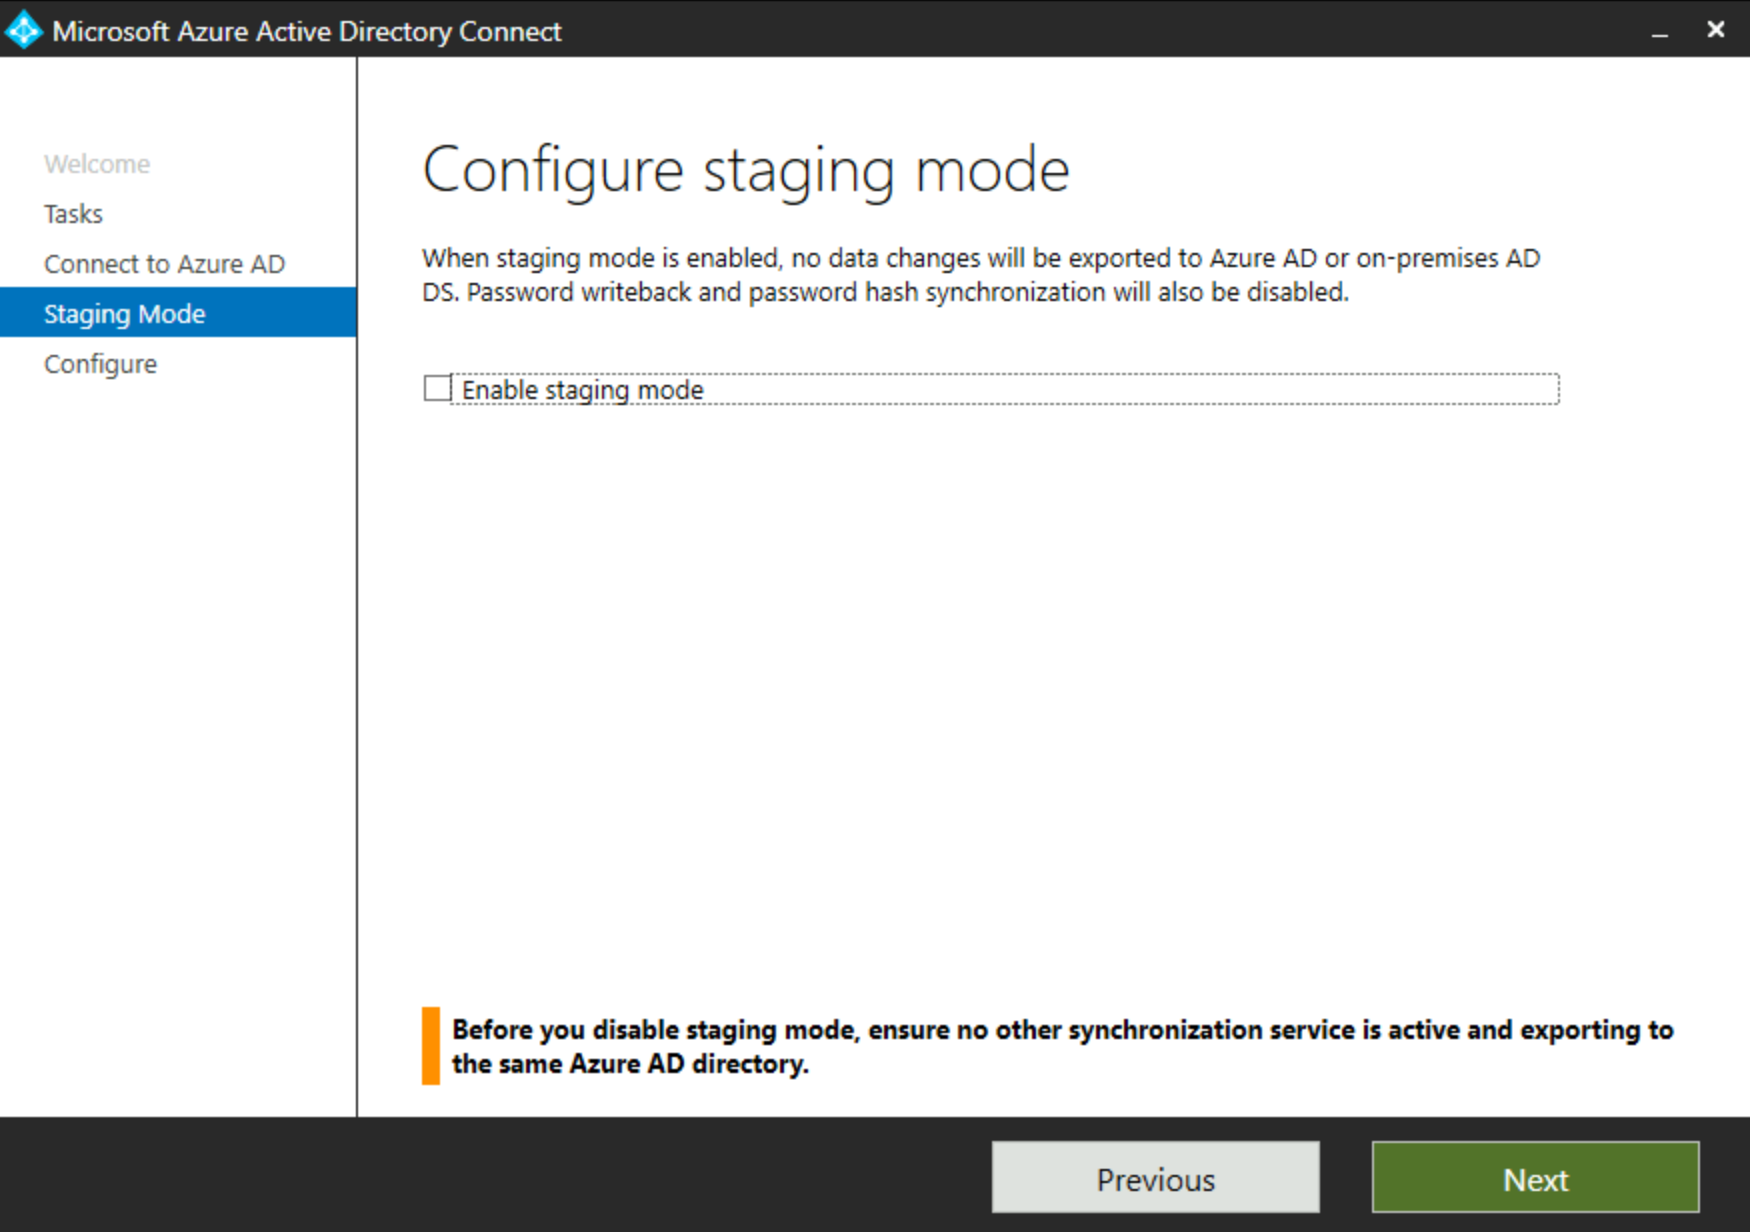 Screenshot shows Staging Mode configuration in the Staging Azure AD Connect dialog box.